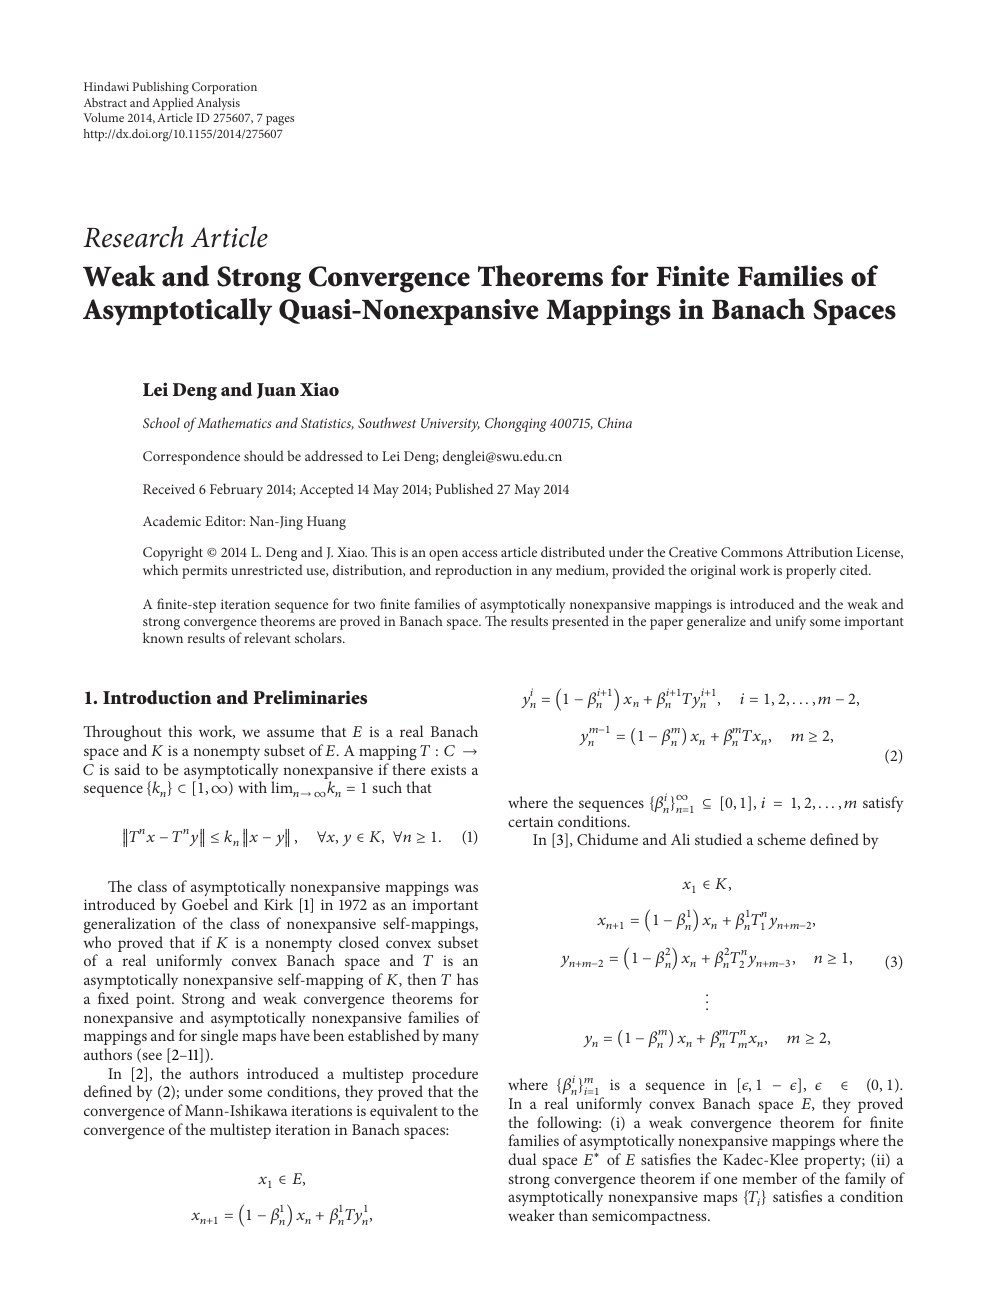 Weak And Strong Convergence Theorems For Finite Families Of Asymptotically Quasi Nonexpansive Mappings In Banach Spaces Topic Of Research Paper In Mathematics Download Scholarly Article Pdf And Read For Free On Cyberleninka